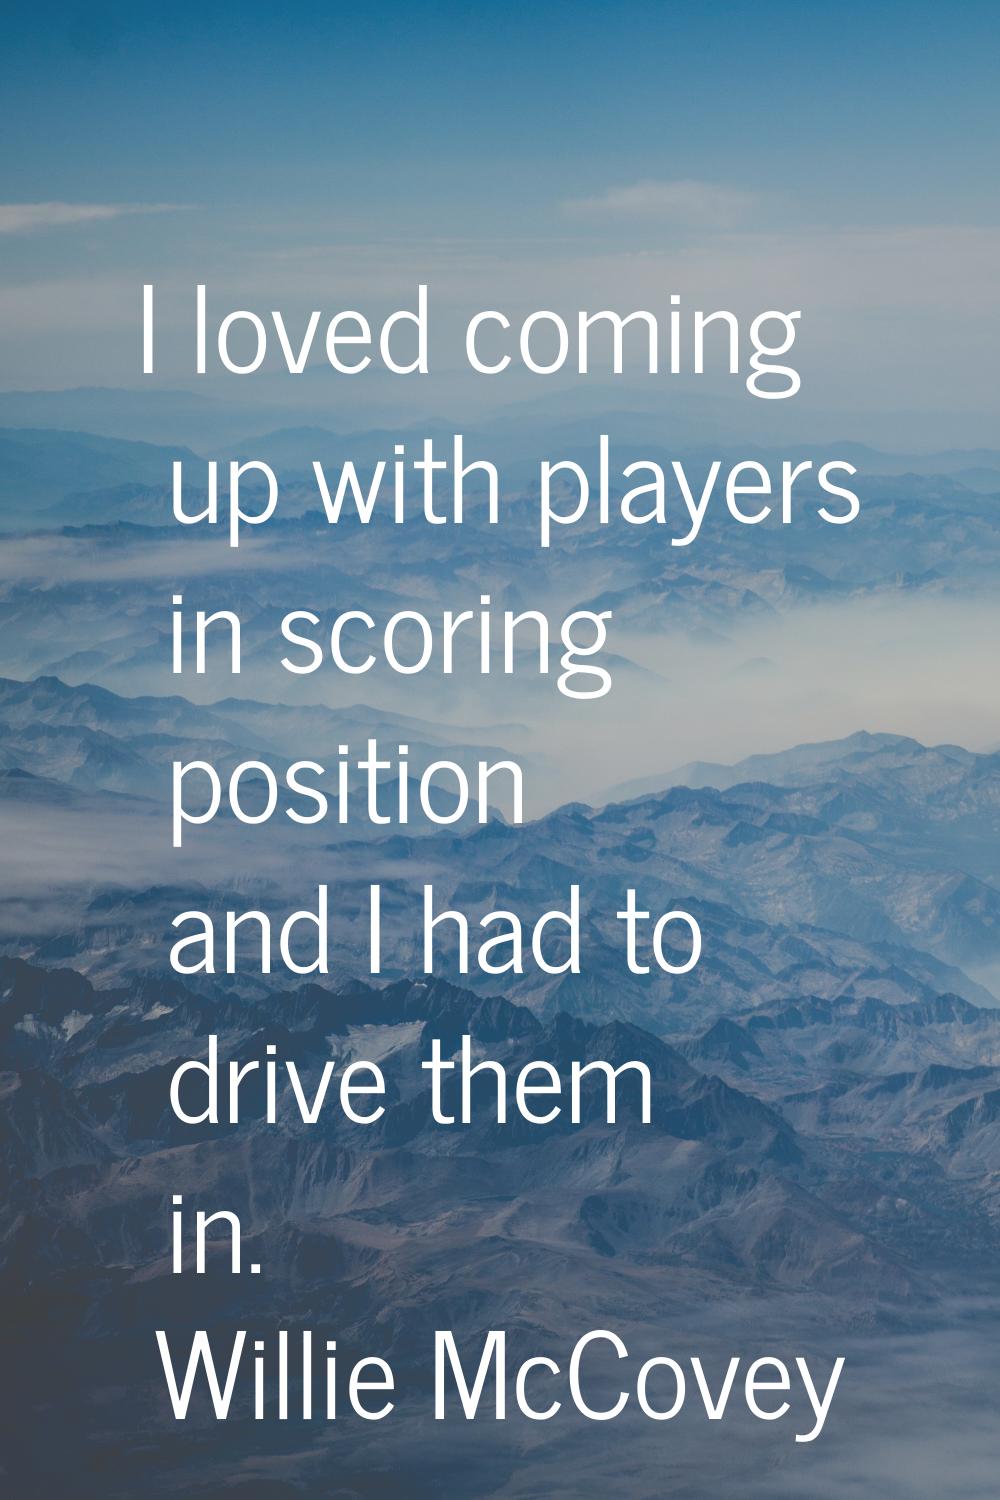 I loved coming up with players in scoring position and I had to drive them in.